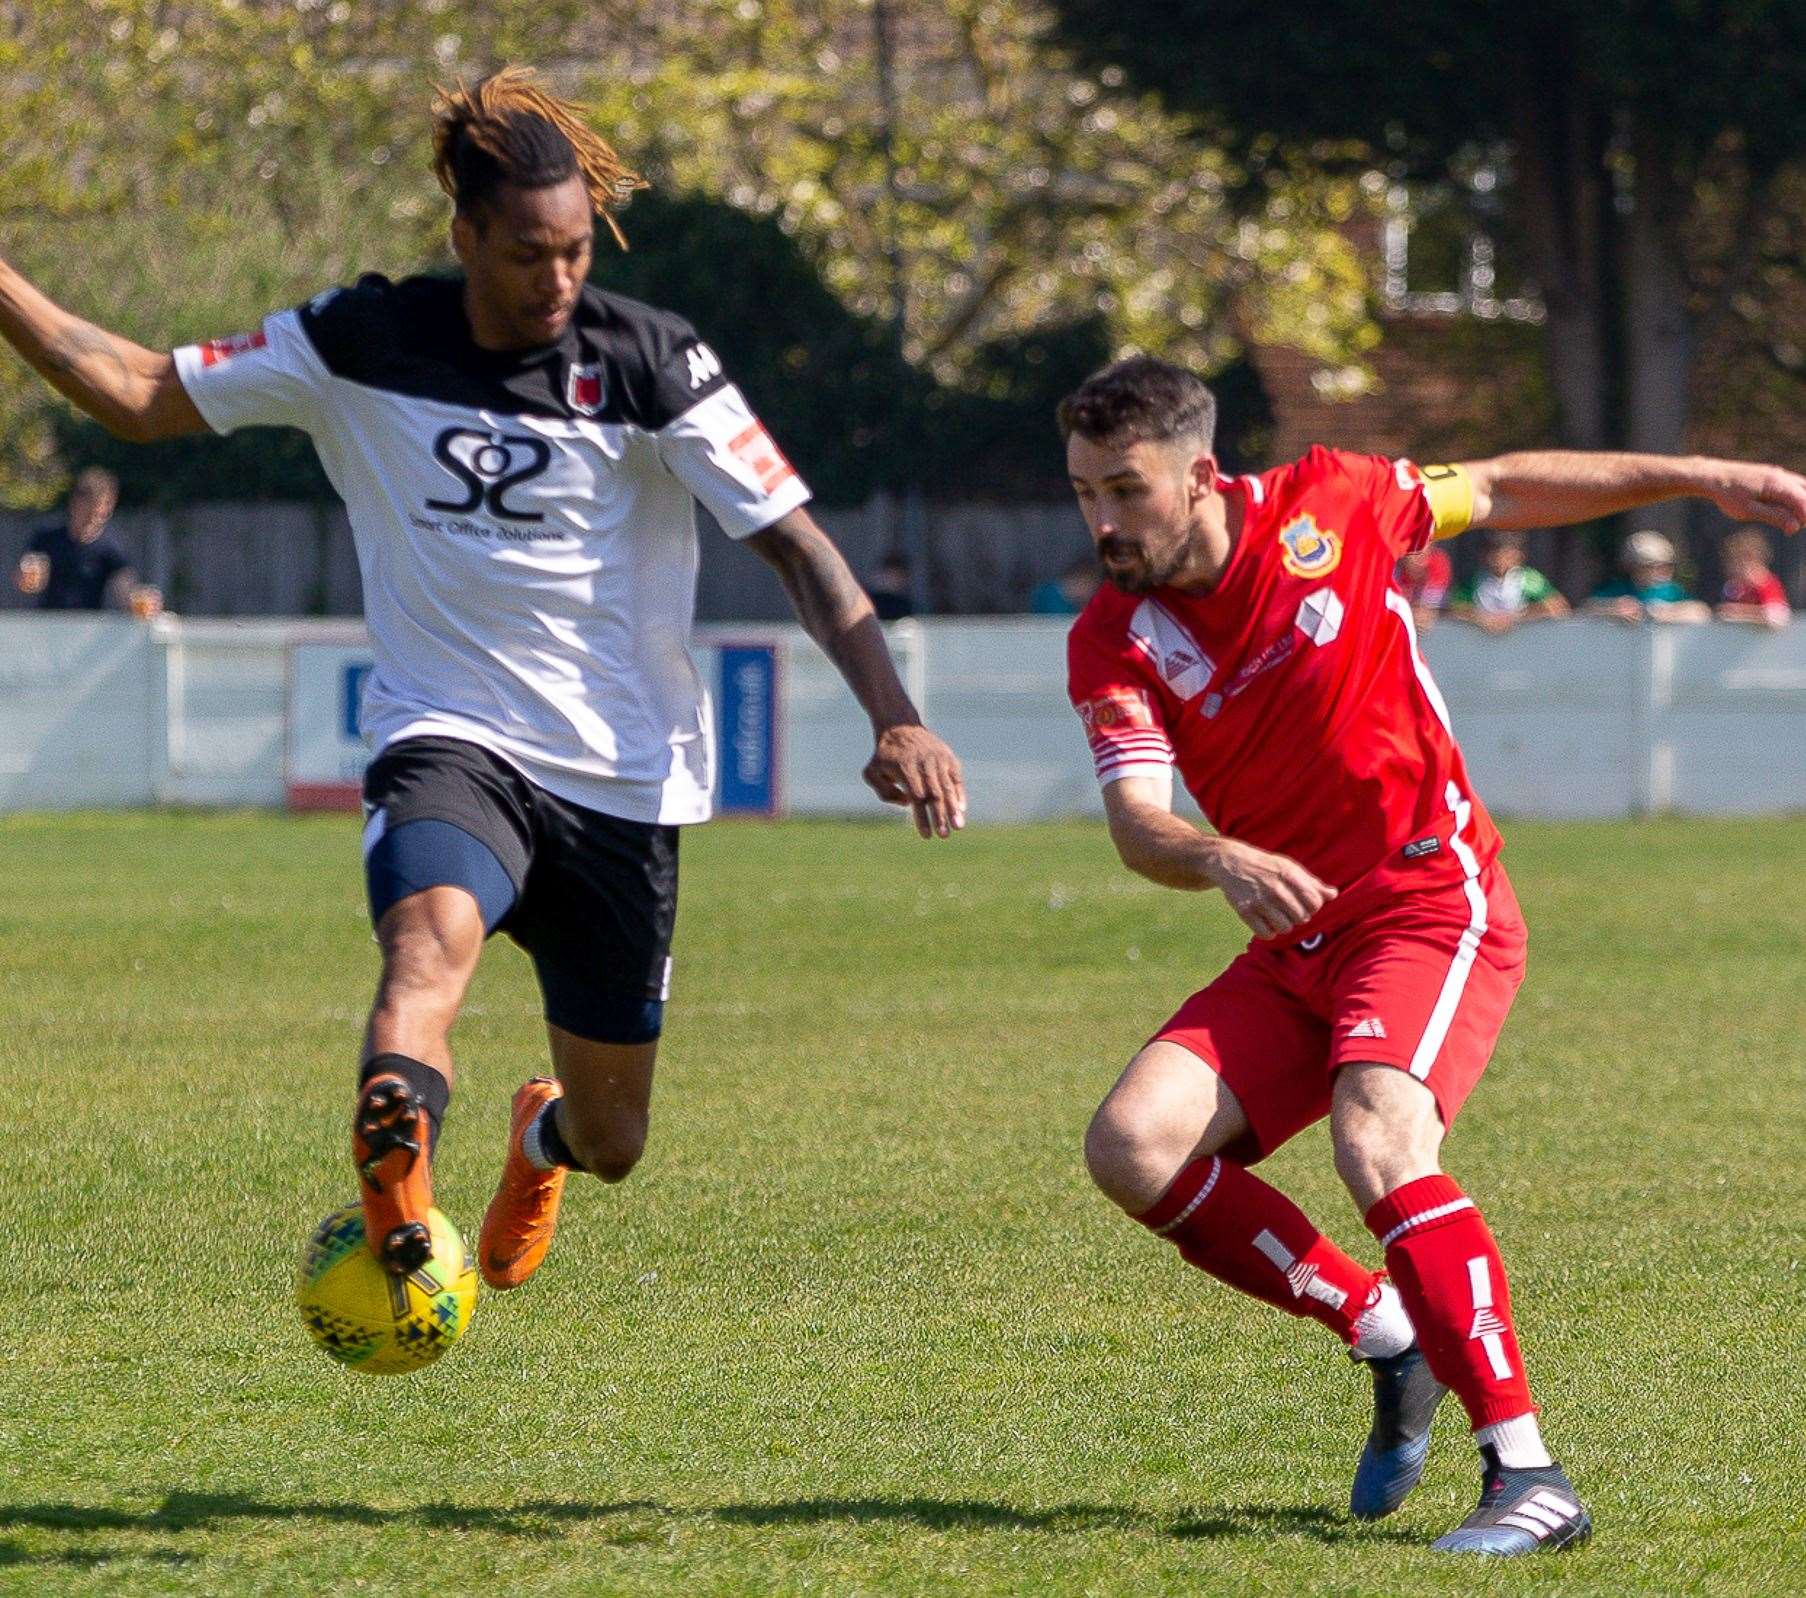 Whitstable's Tom Mills cuts behind Tyrell Richardson-Brown as Faversham beat Whitstable 1-0 last Saturday. Picture: Les Biggs